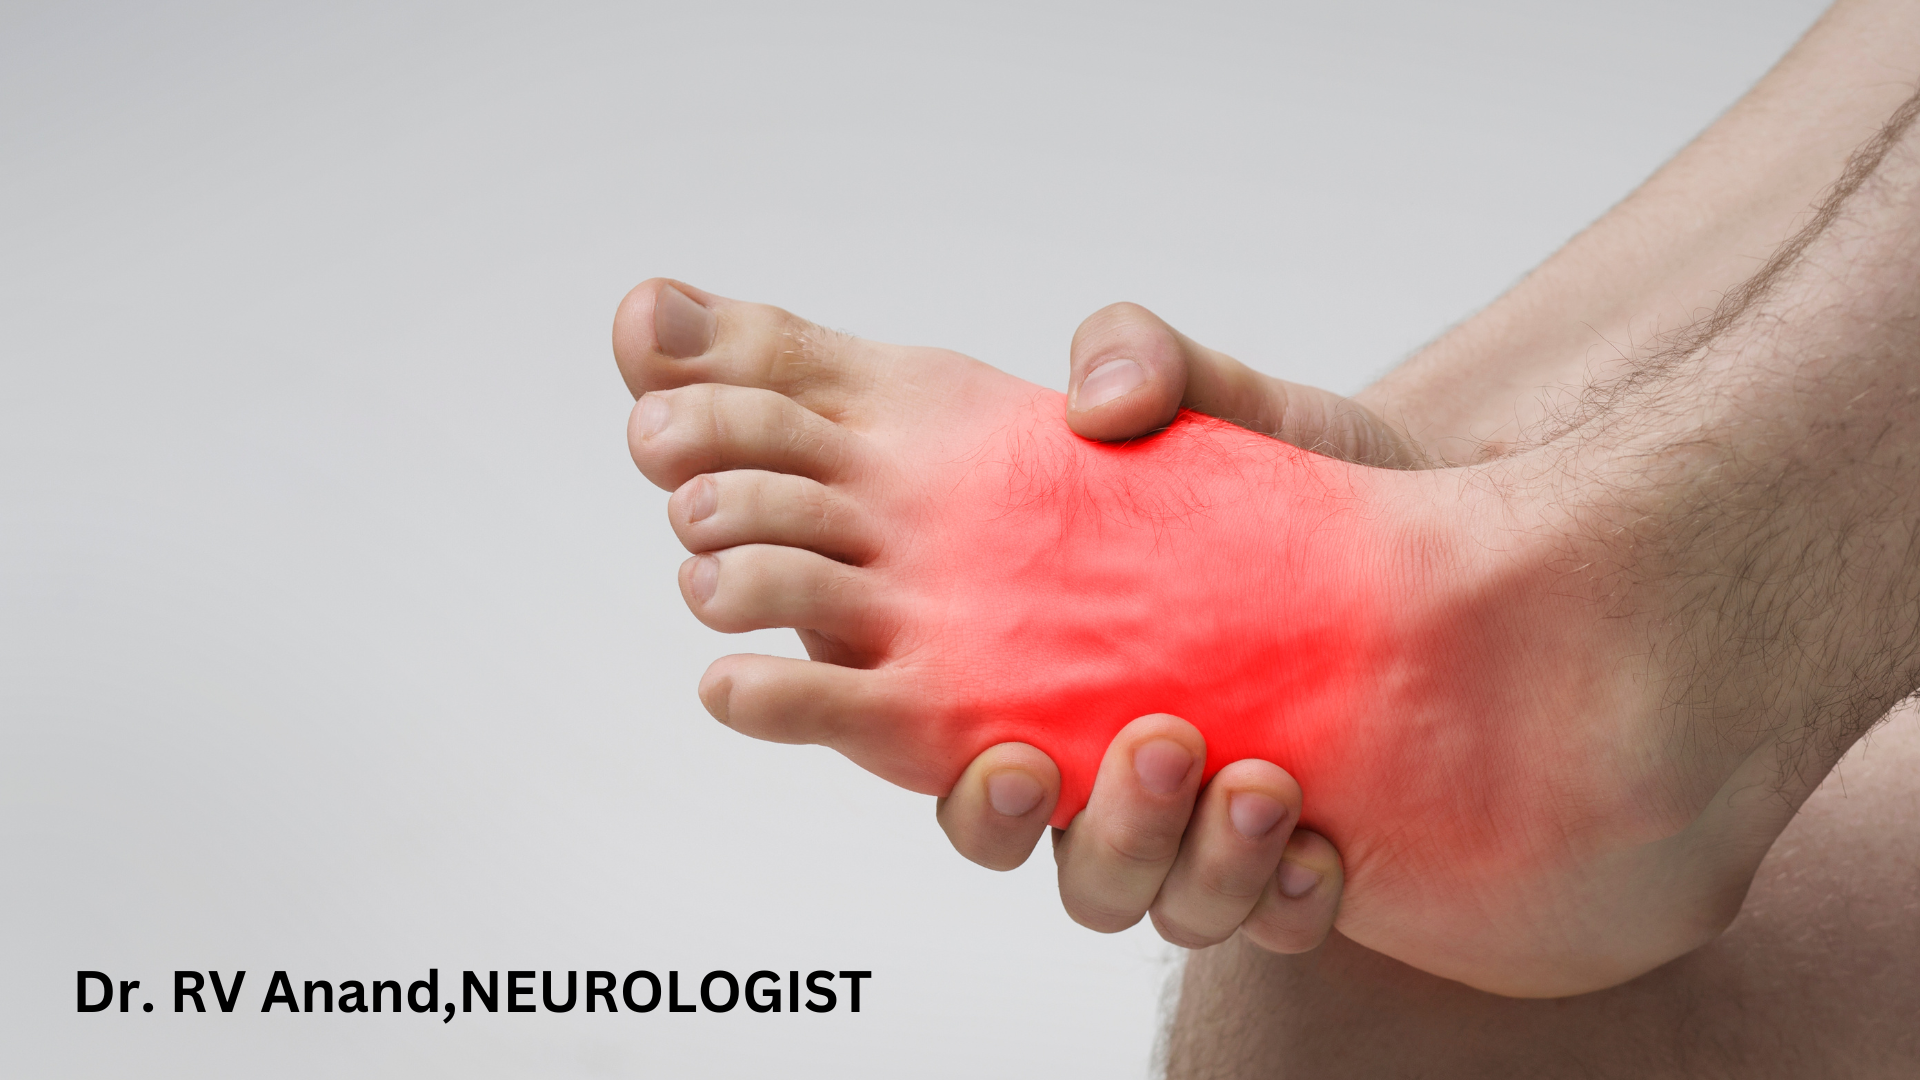 UNDERSTANDING WHAT IS 'FOOT DROP” AND ITS SYMPTOMS, CAUSES AND